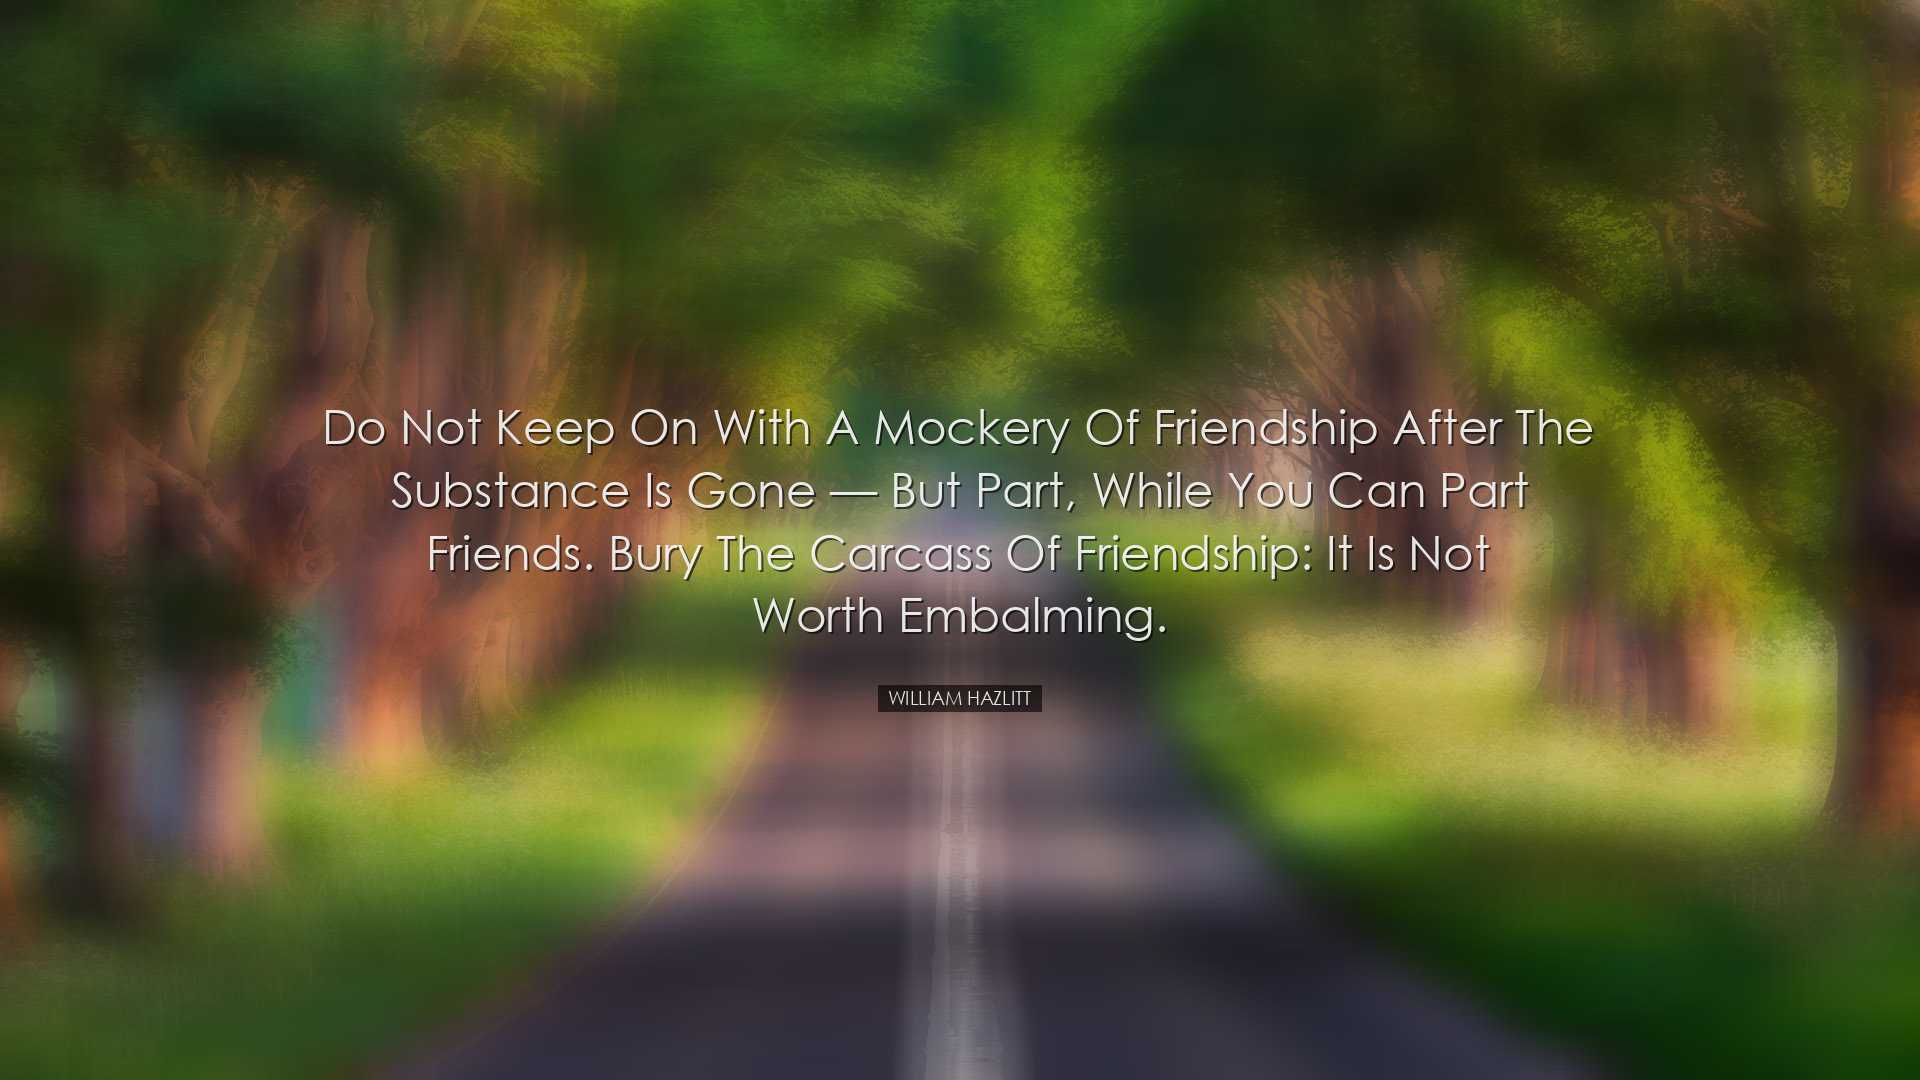 Do not keep on with a mockery of friendship after the substance is